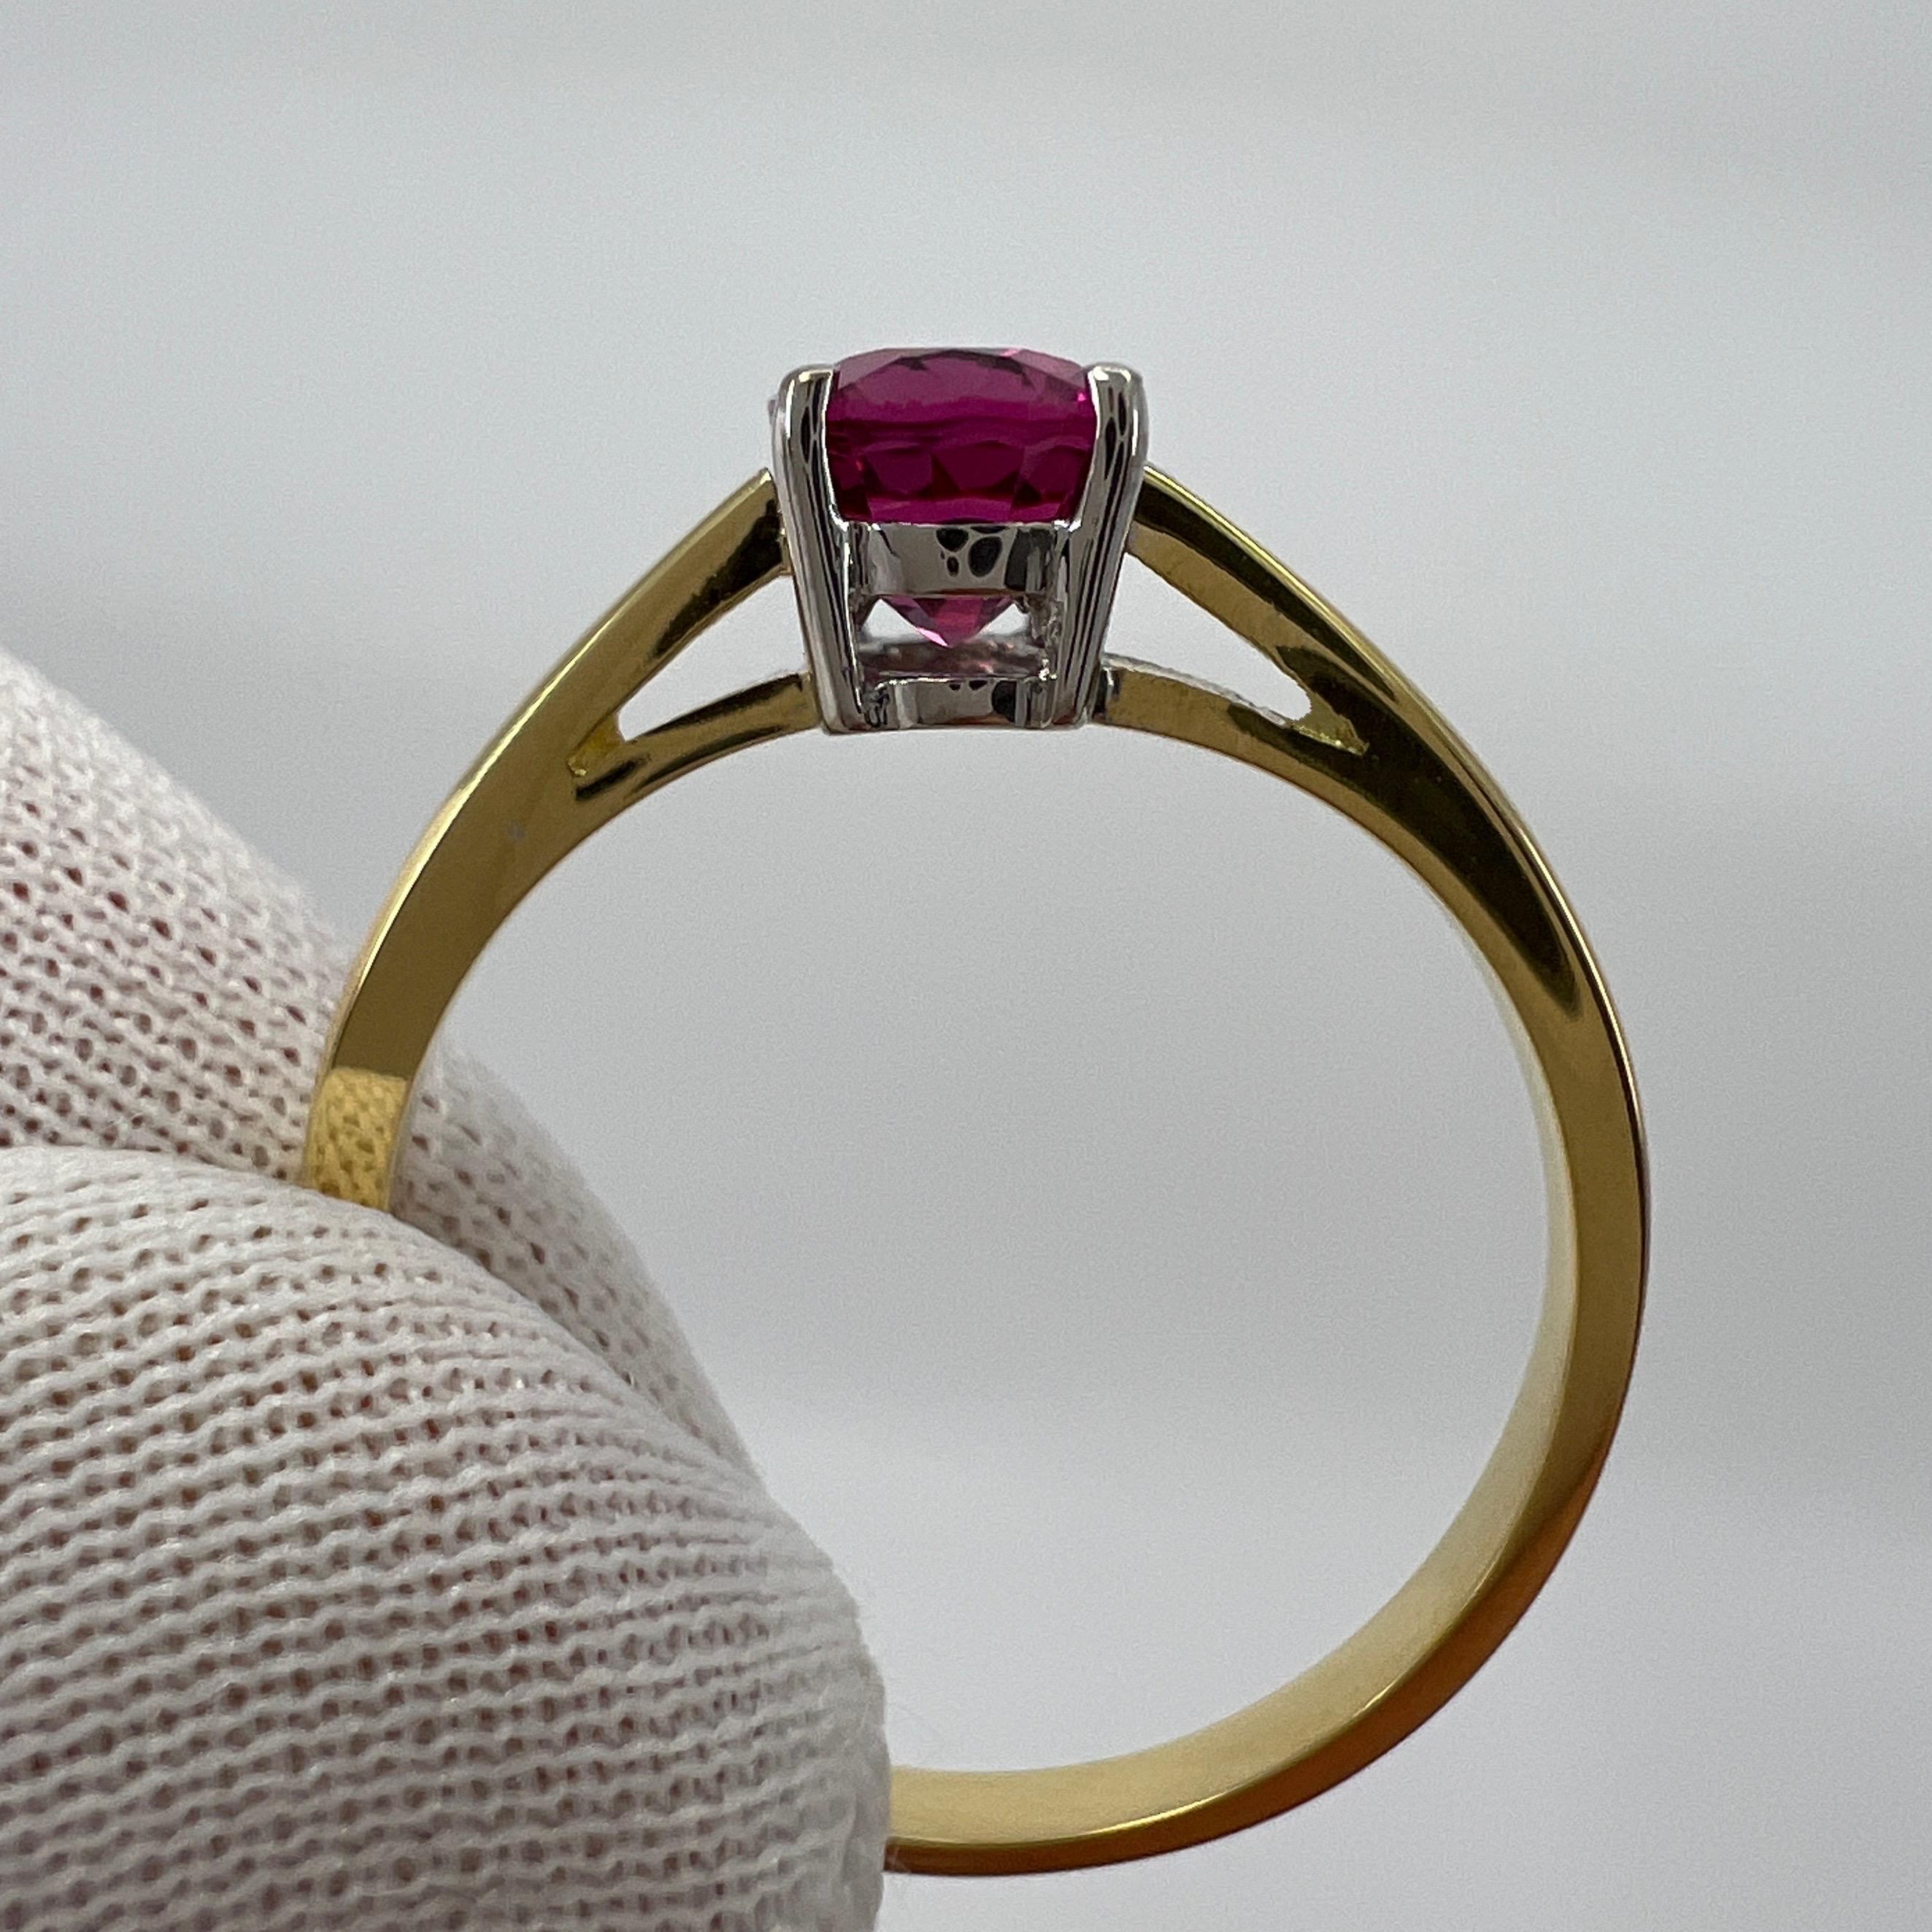 1.10ct Vivid Pink Purple Rubellite Tourmaline Oval Cut 18k Gold Solitaire Ring In New Condition For Sale In Birmingham, GB